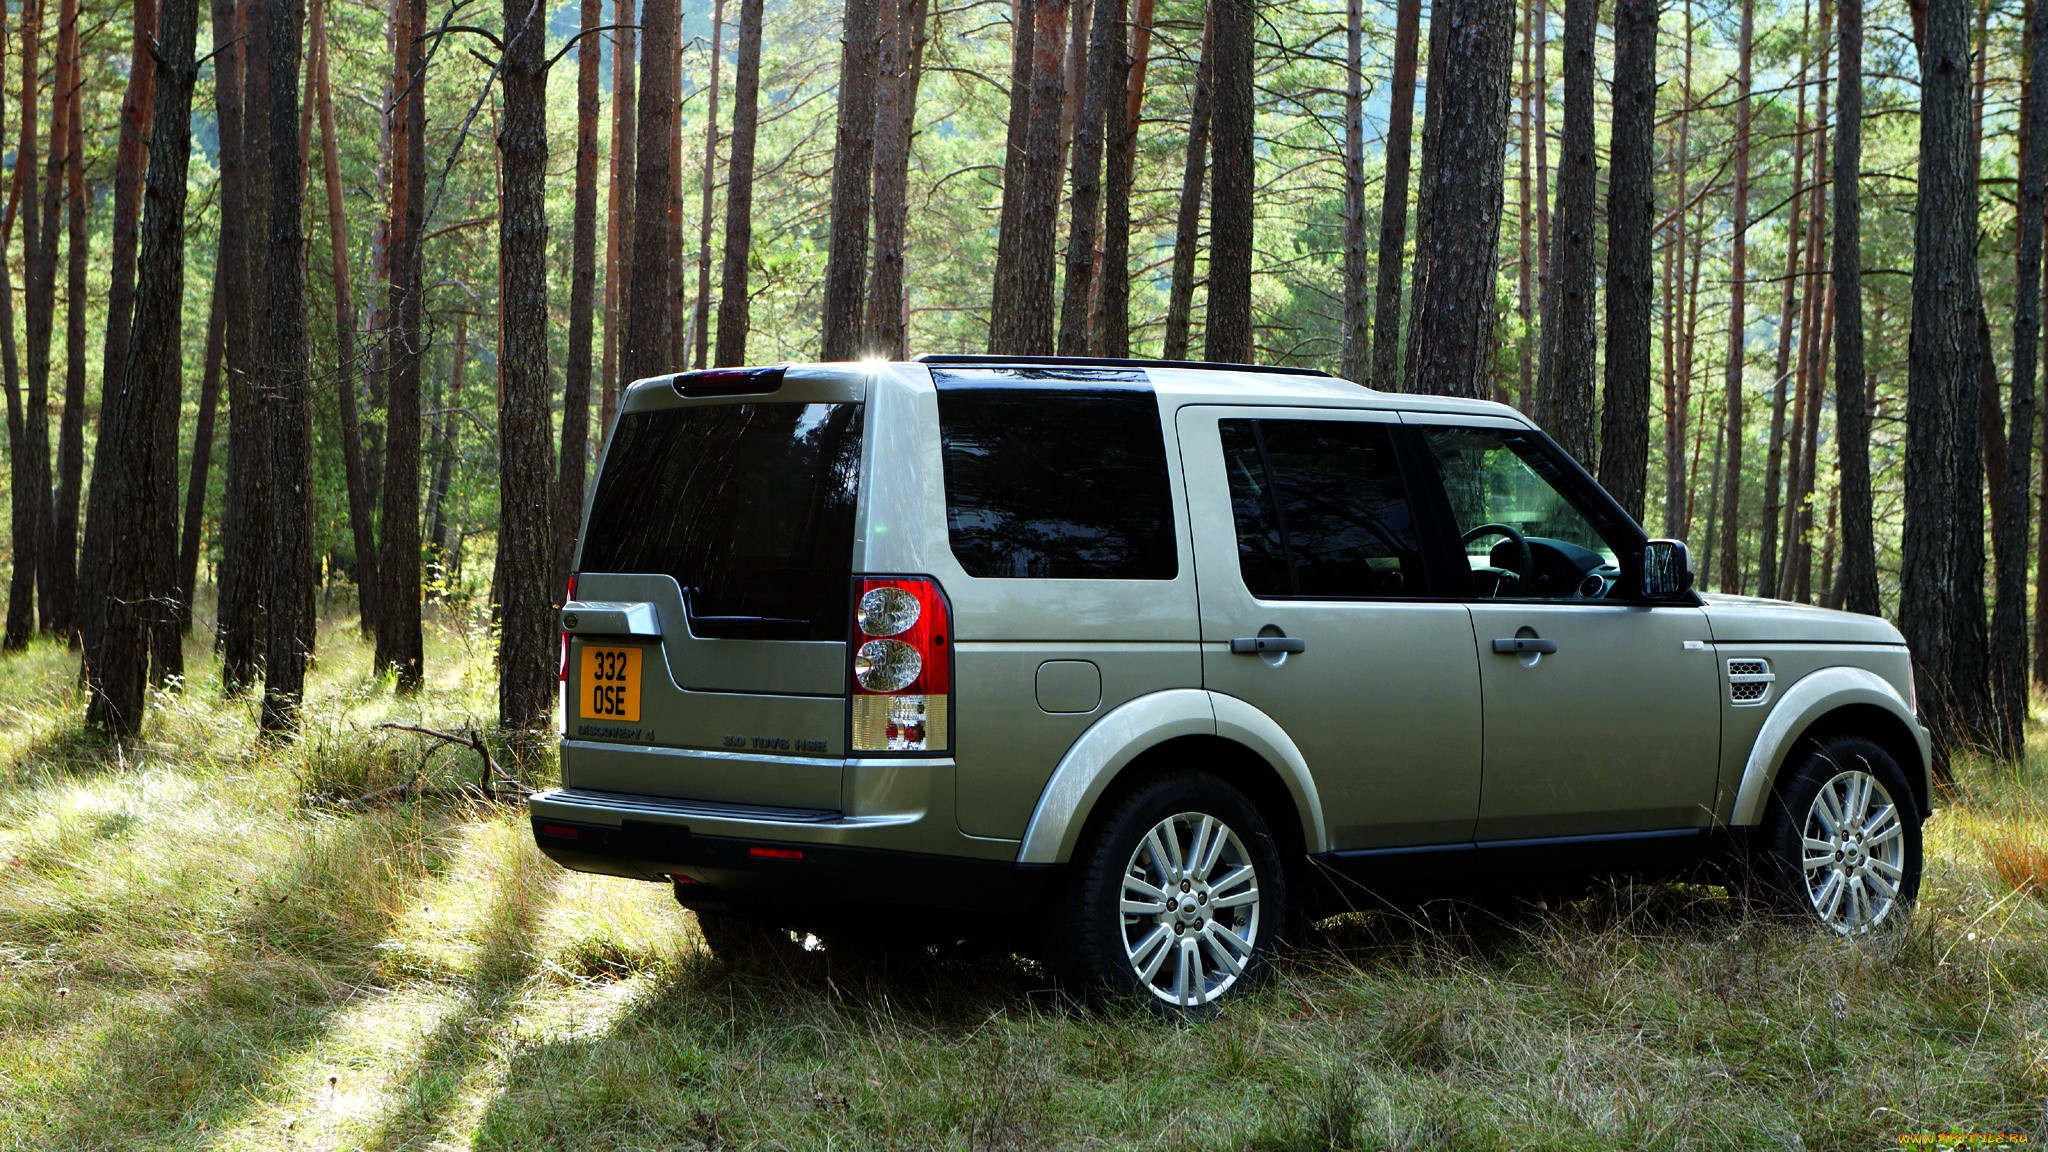 Дискавери 12. Land Rover Discovery 4. Ленд Ровер Дискавери 4 2009. Land Rover Discovery 2010. Land Rover Discovery tdv6.